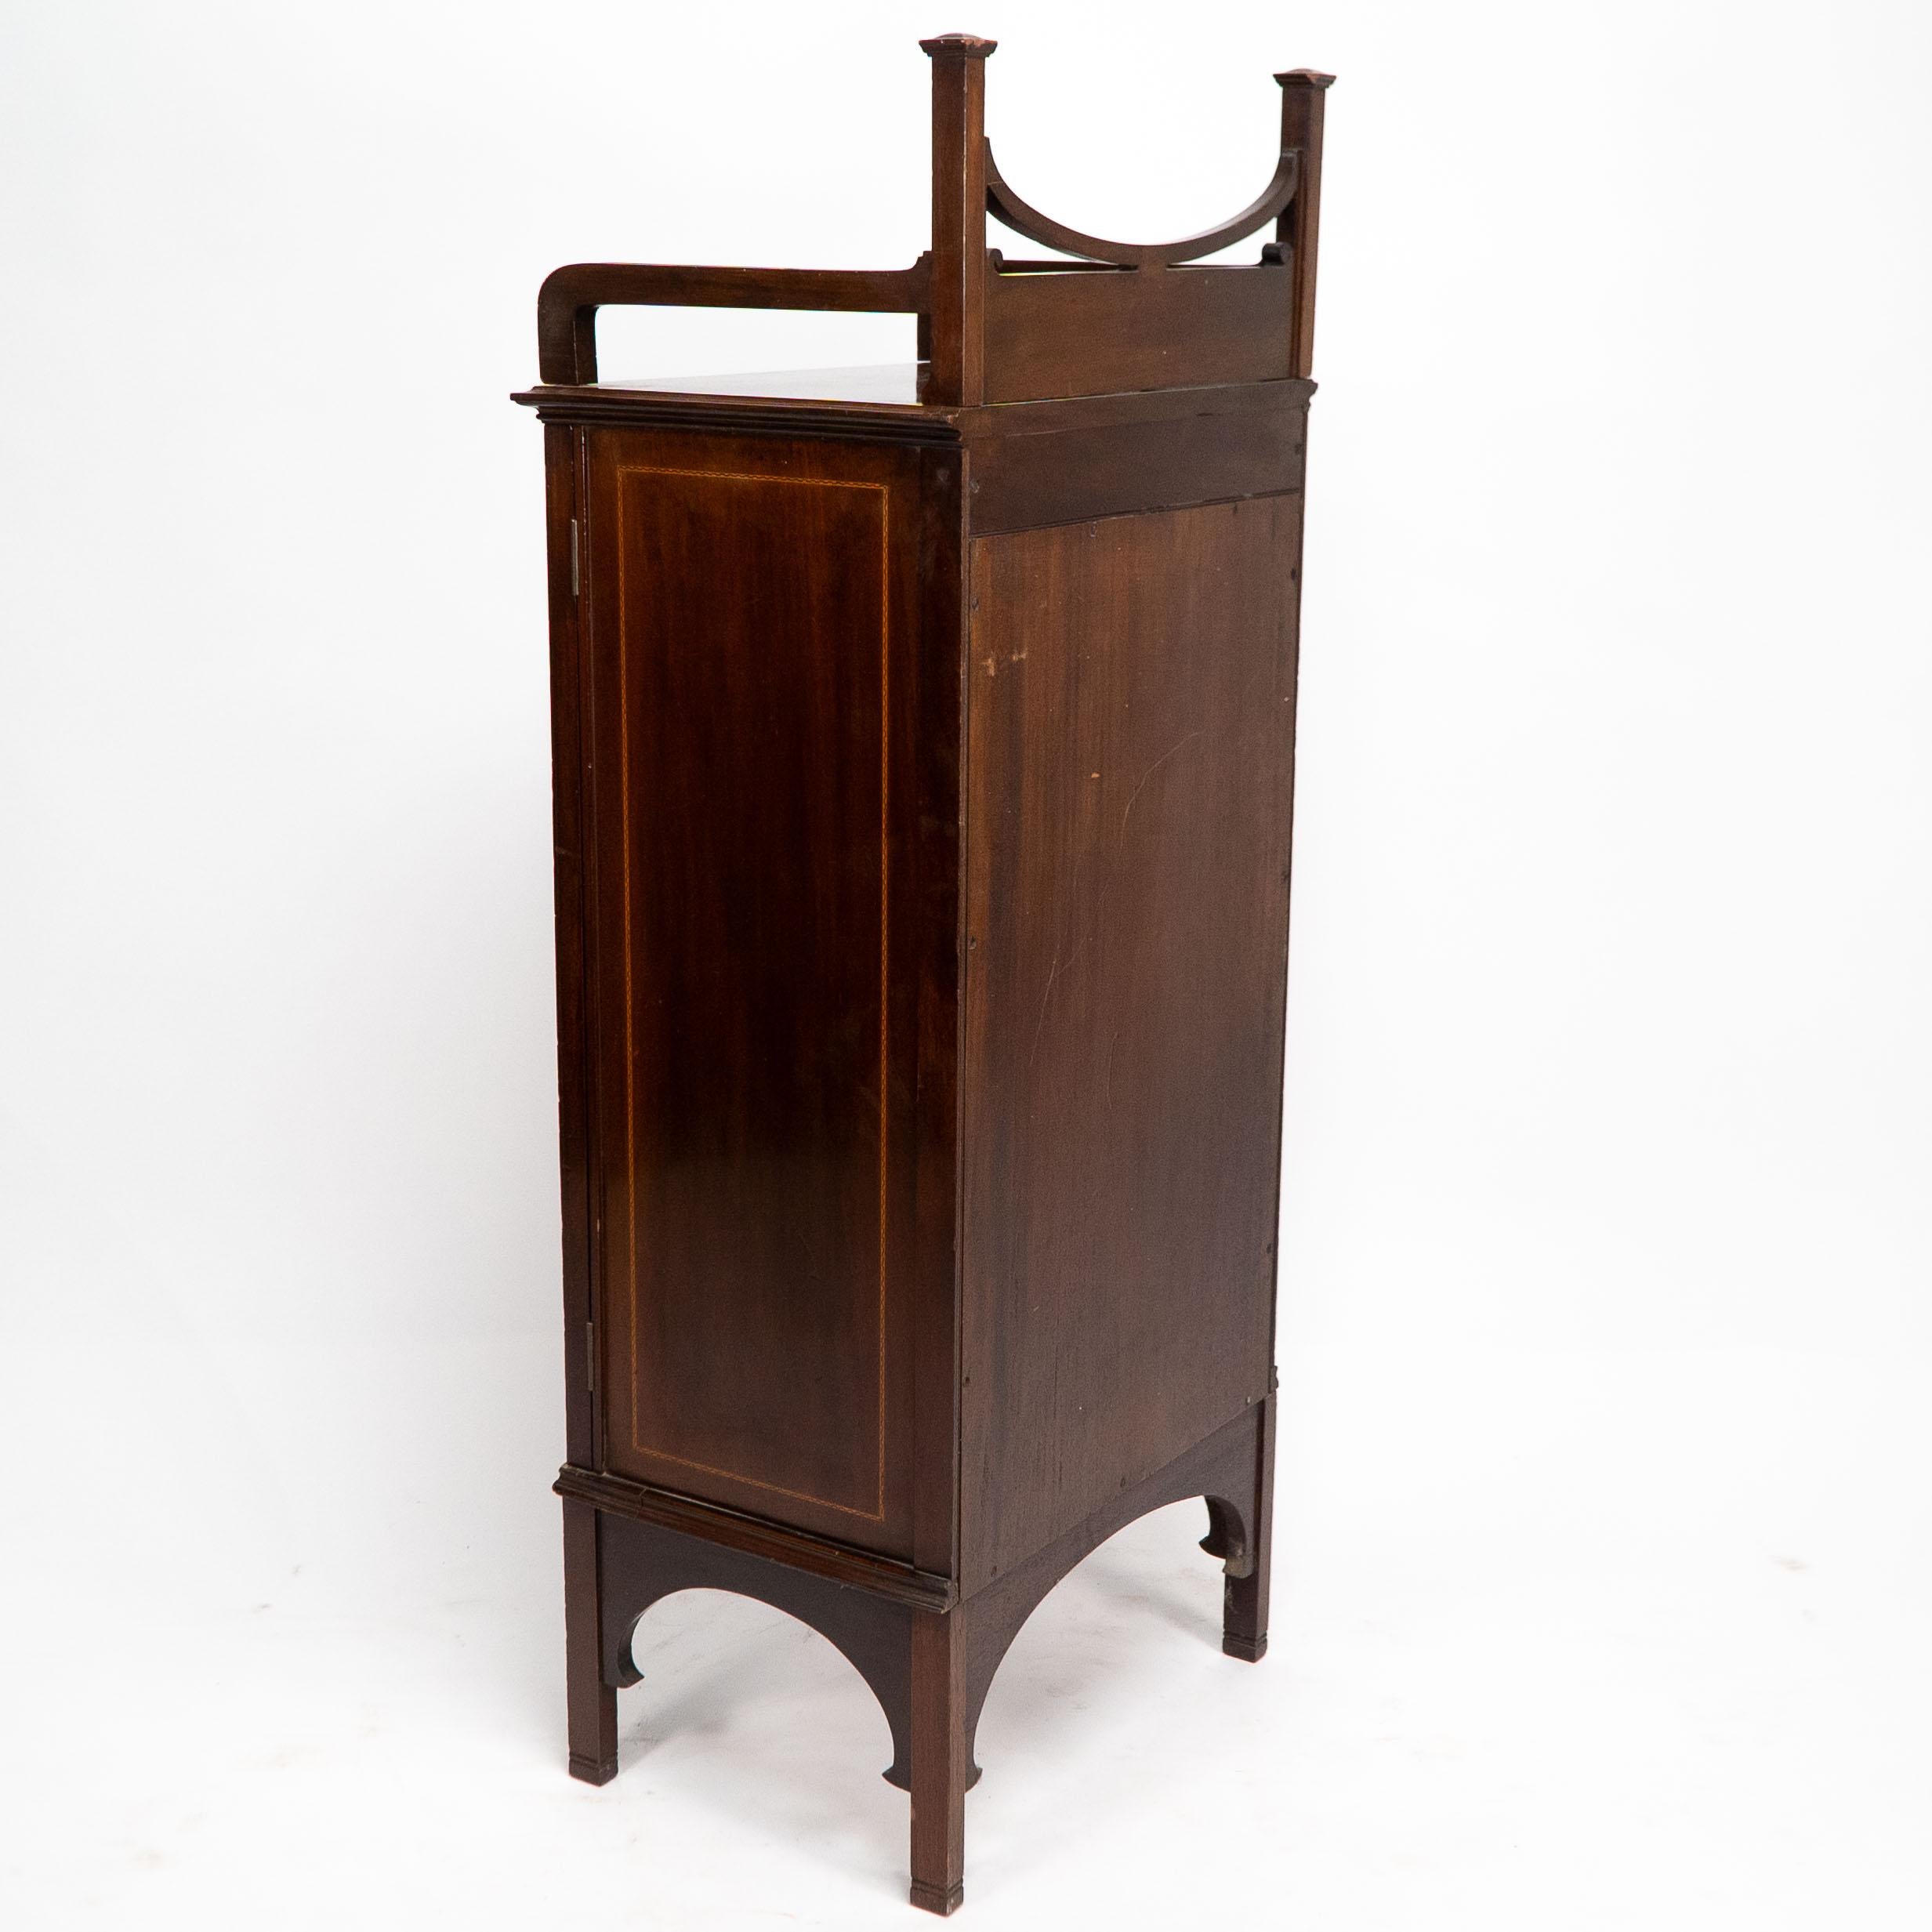 A Petite Arts & Crafts Mahogany Display Cabinet in the Anglo-Japanese Style. For Sale 3